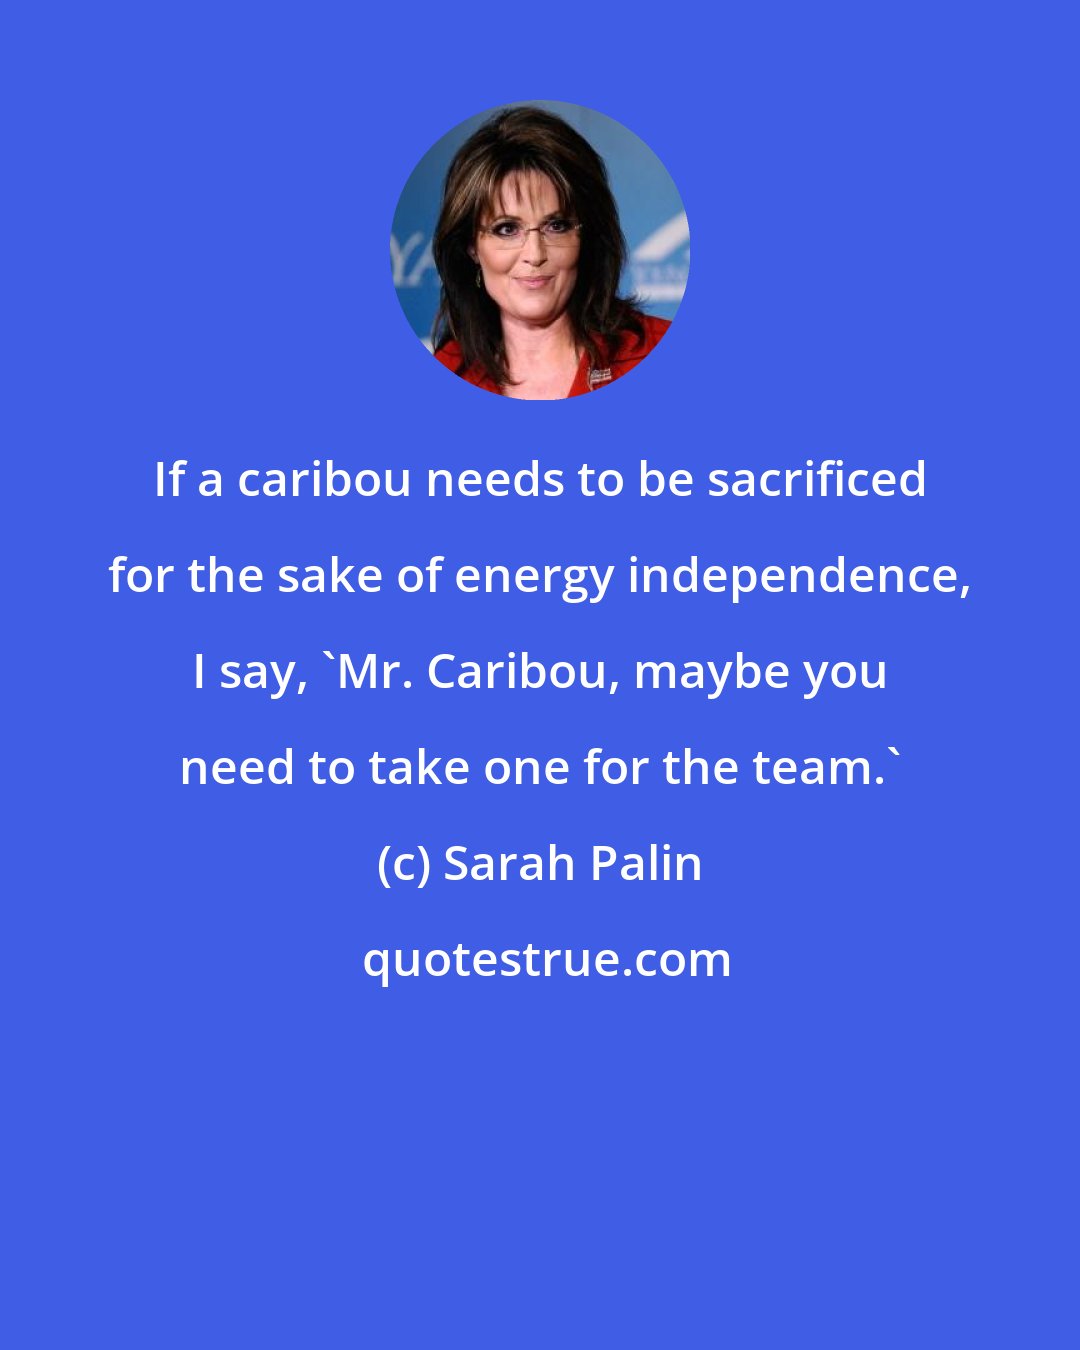 Sarah Palin: If a caribou needs to be sacrificed for the sake of energy independence, I say, 'Mr. Caribou, maybe you need to take one for the team.'